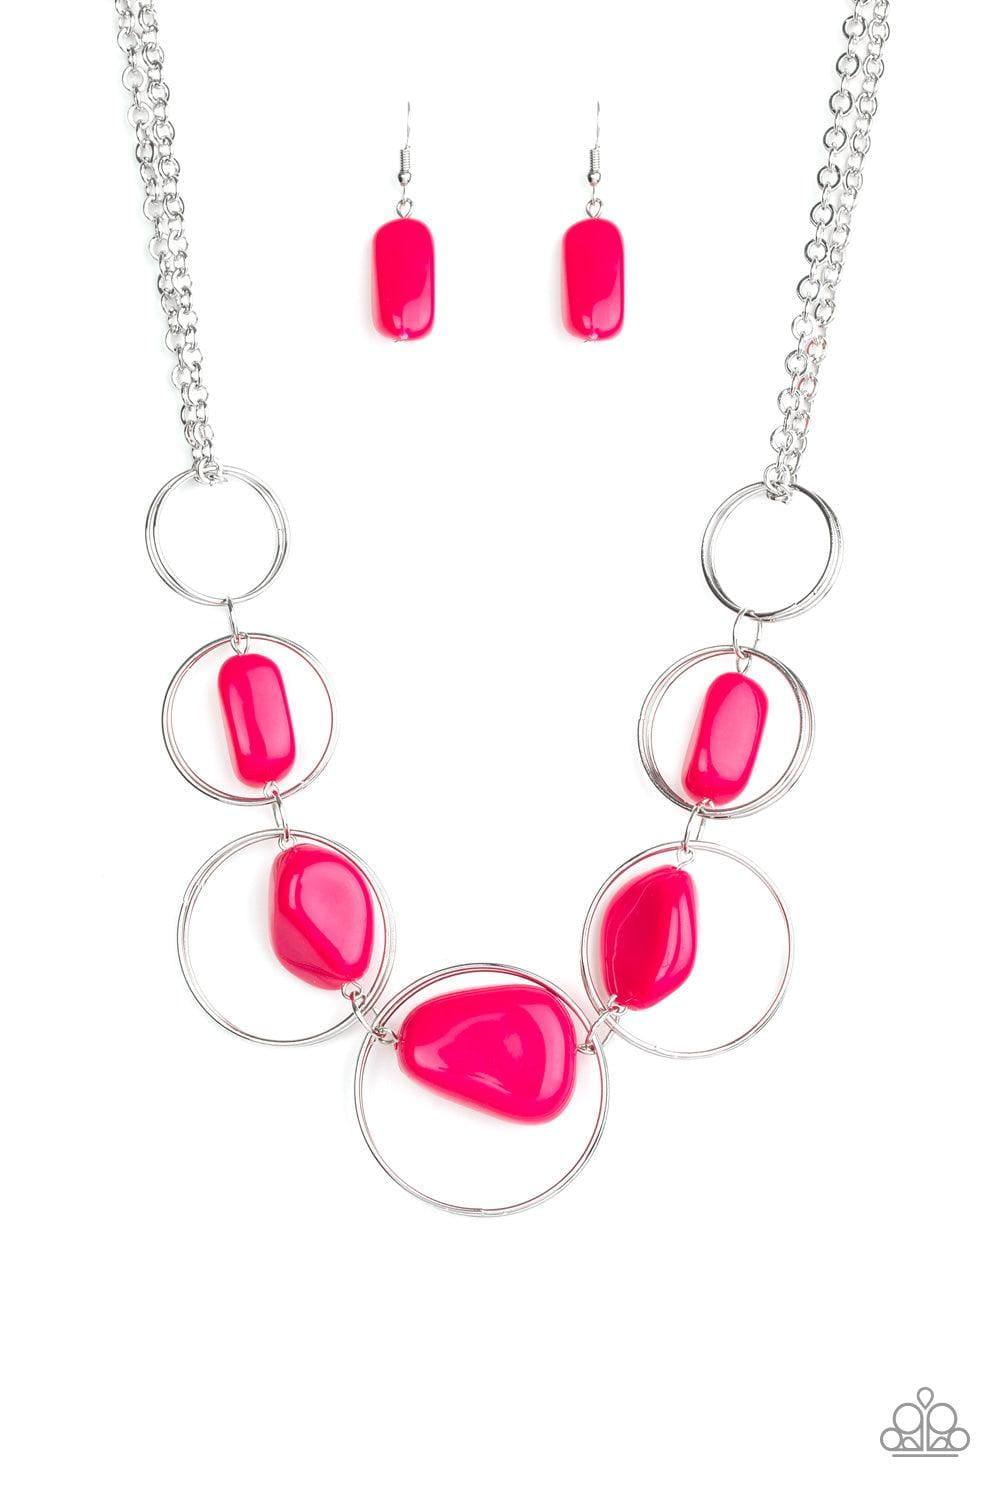 Paparazzi Accessories - Travel Log - Pink Necklace - Bling by JessieK